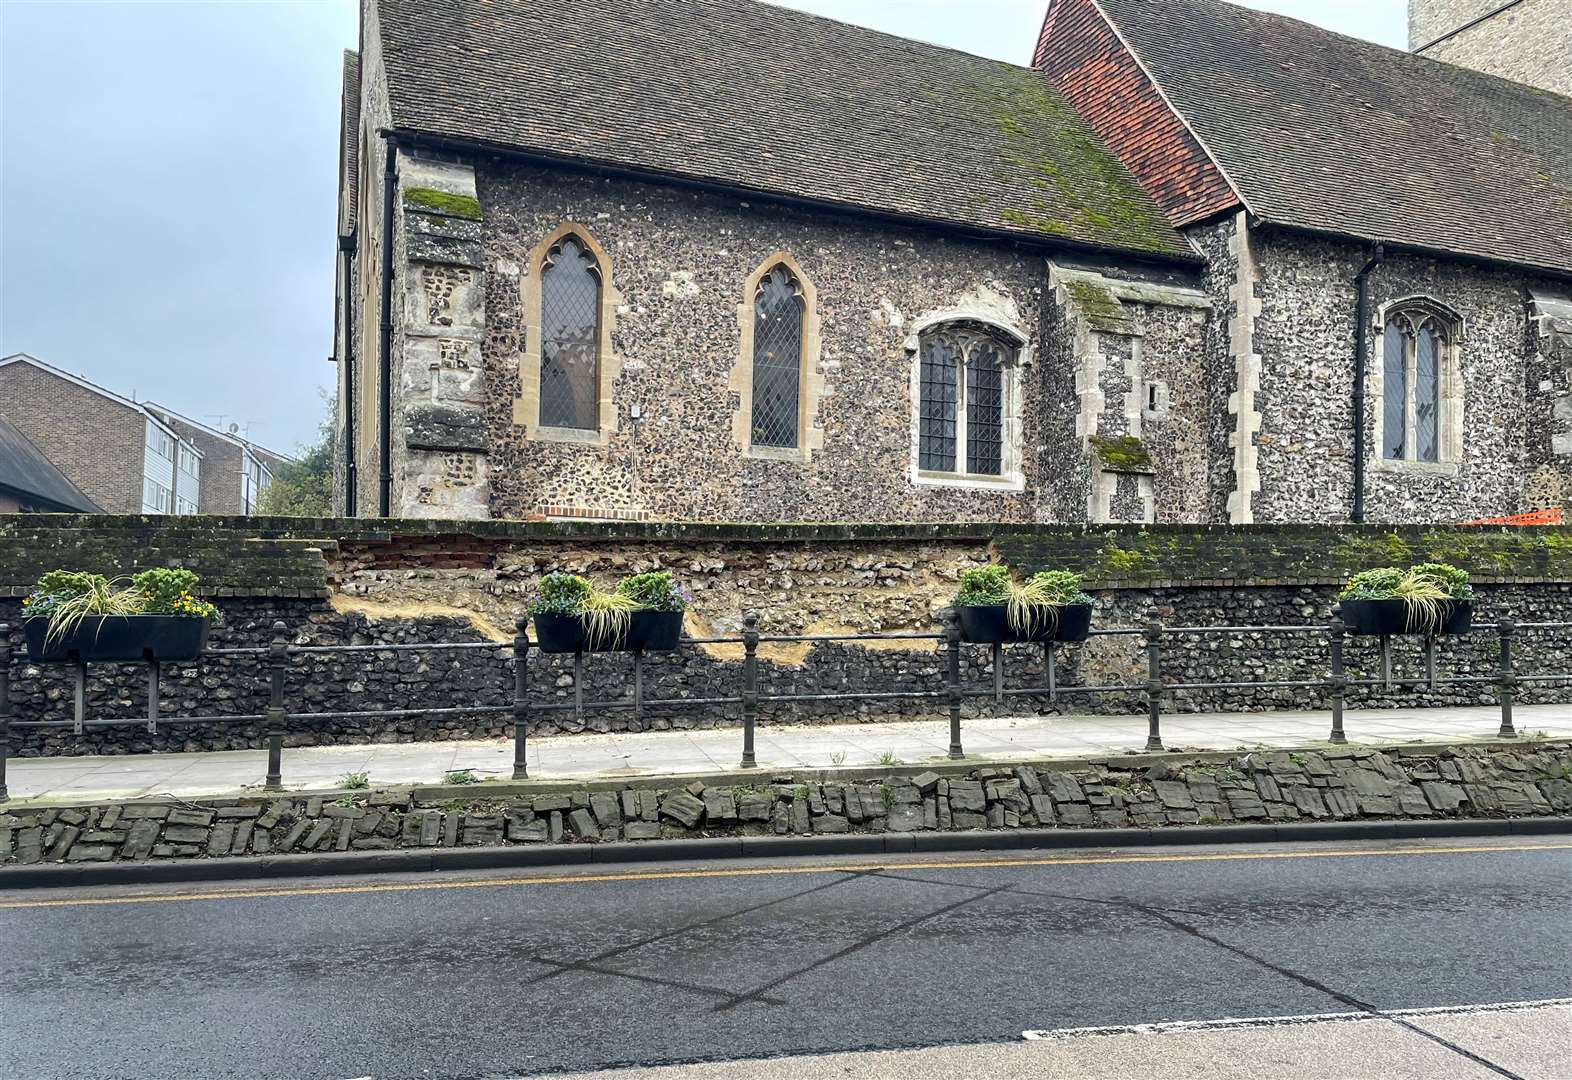 The crumbling wall at St Margaret's Church in Rainham when it collapsed in January